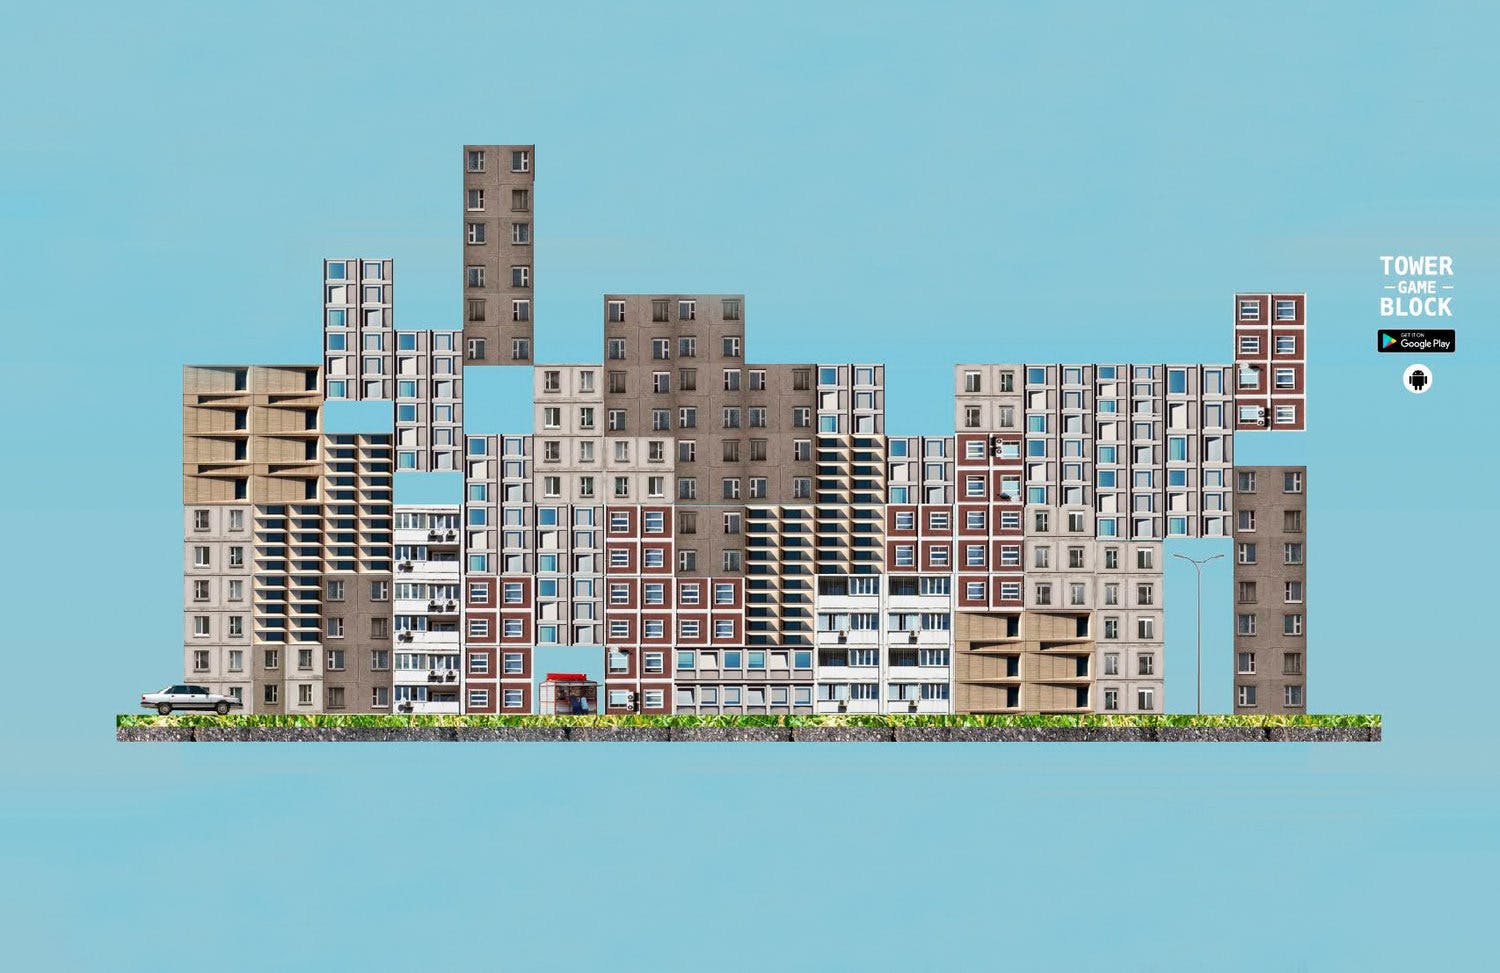 You can now play Tetris with Soviet-style housing blocks | News | Archinect